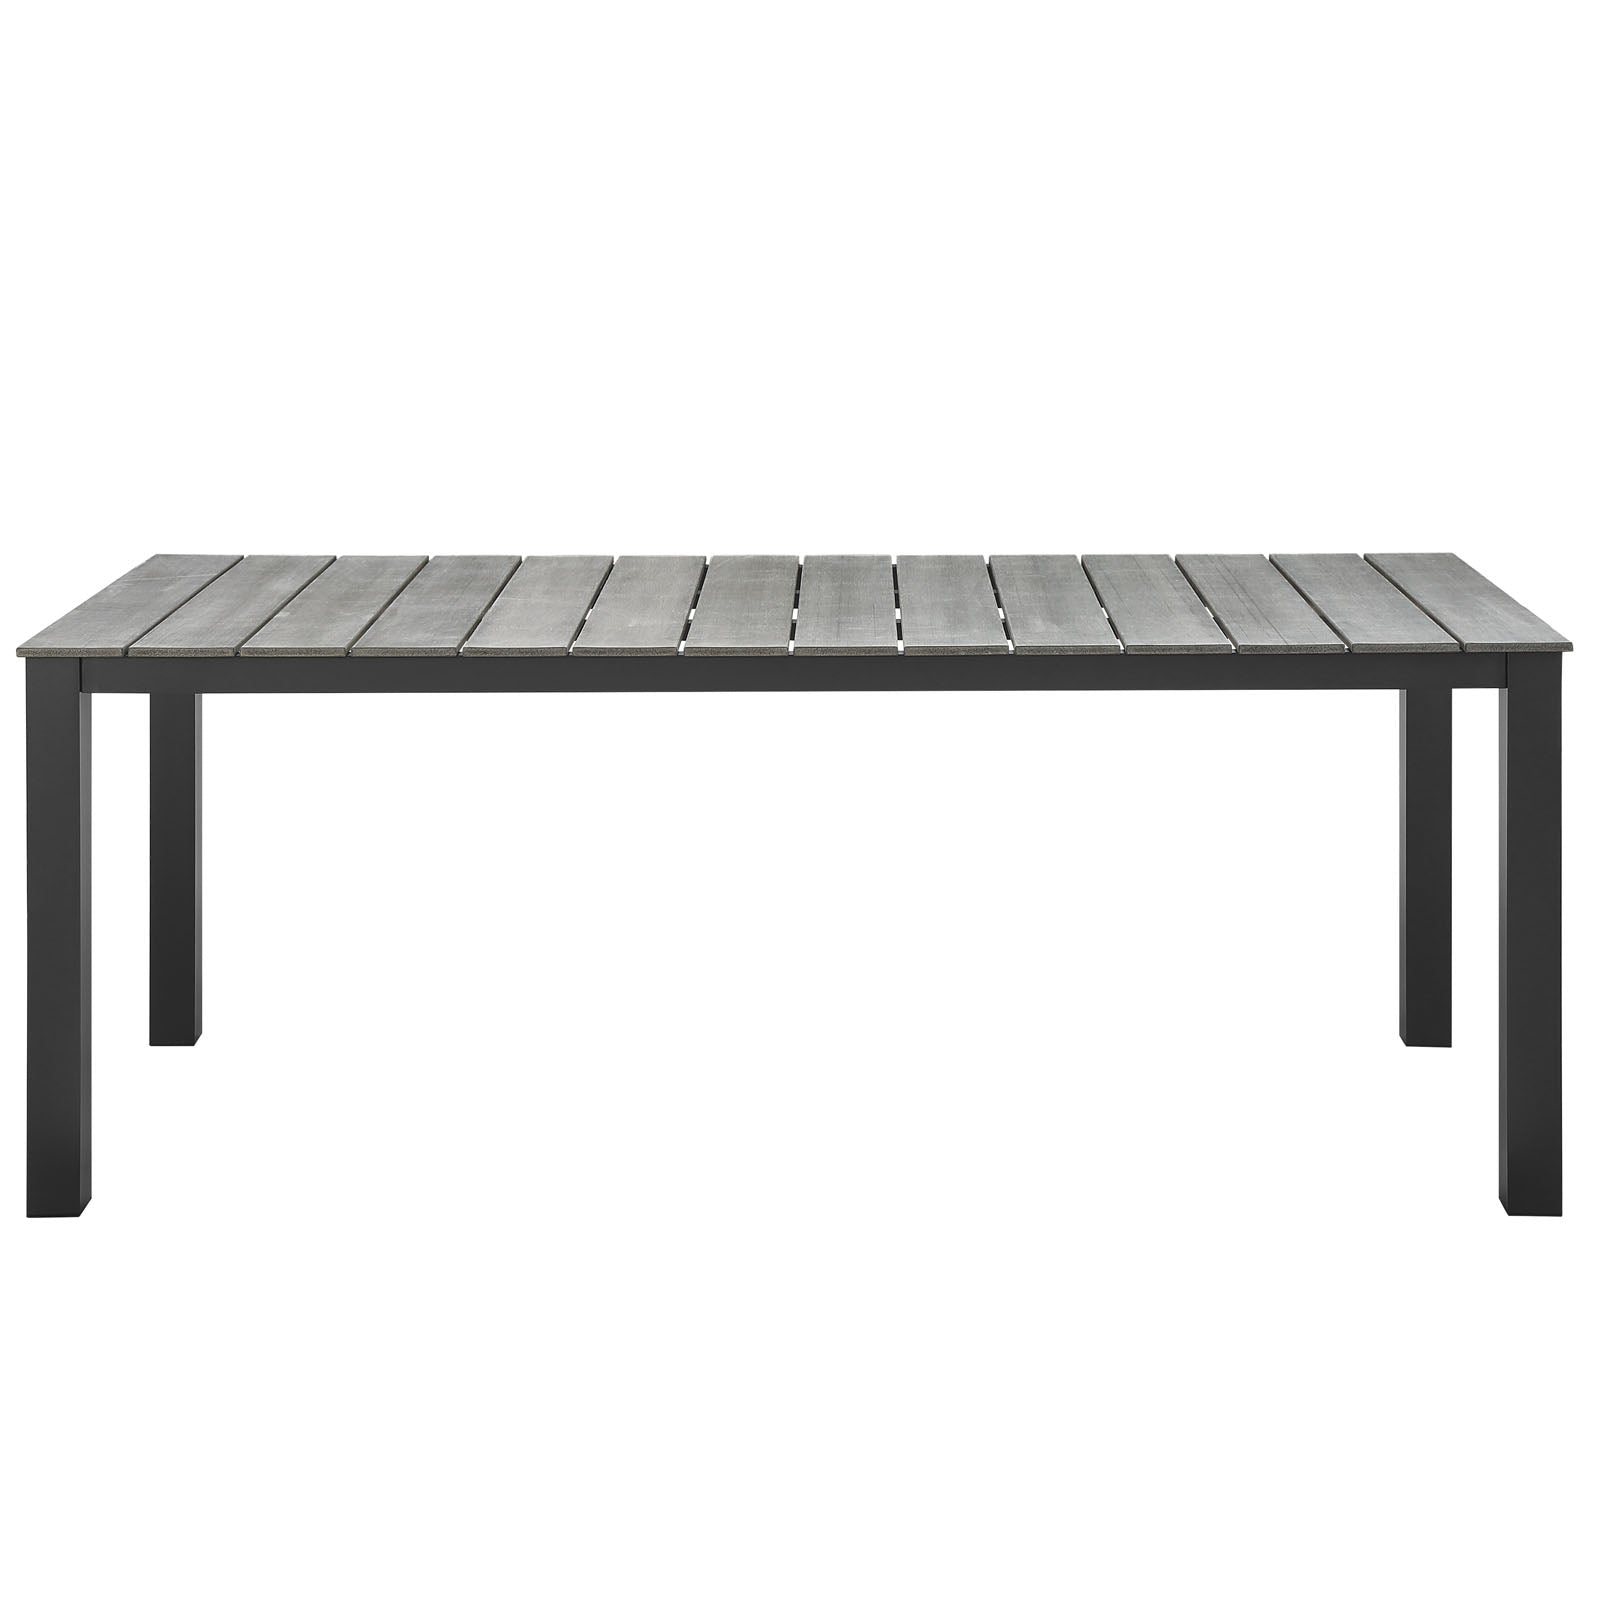 Maine 80" Outdoor Patio Dining Table - East Shore Modern Home Furnishings